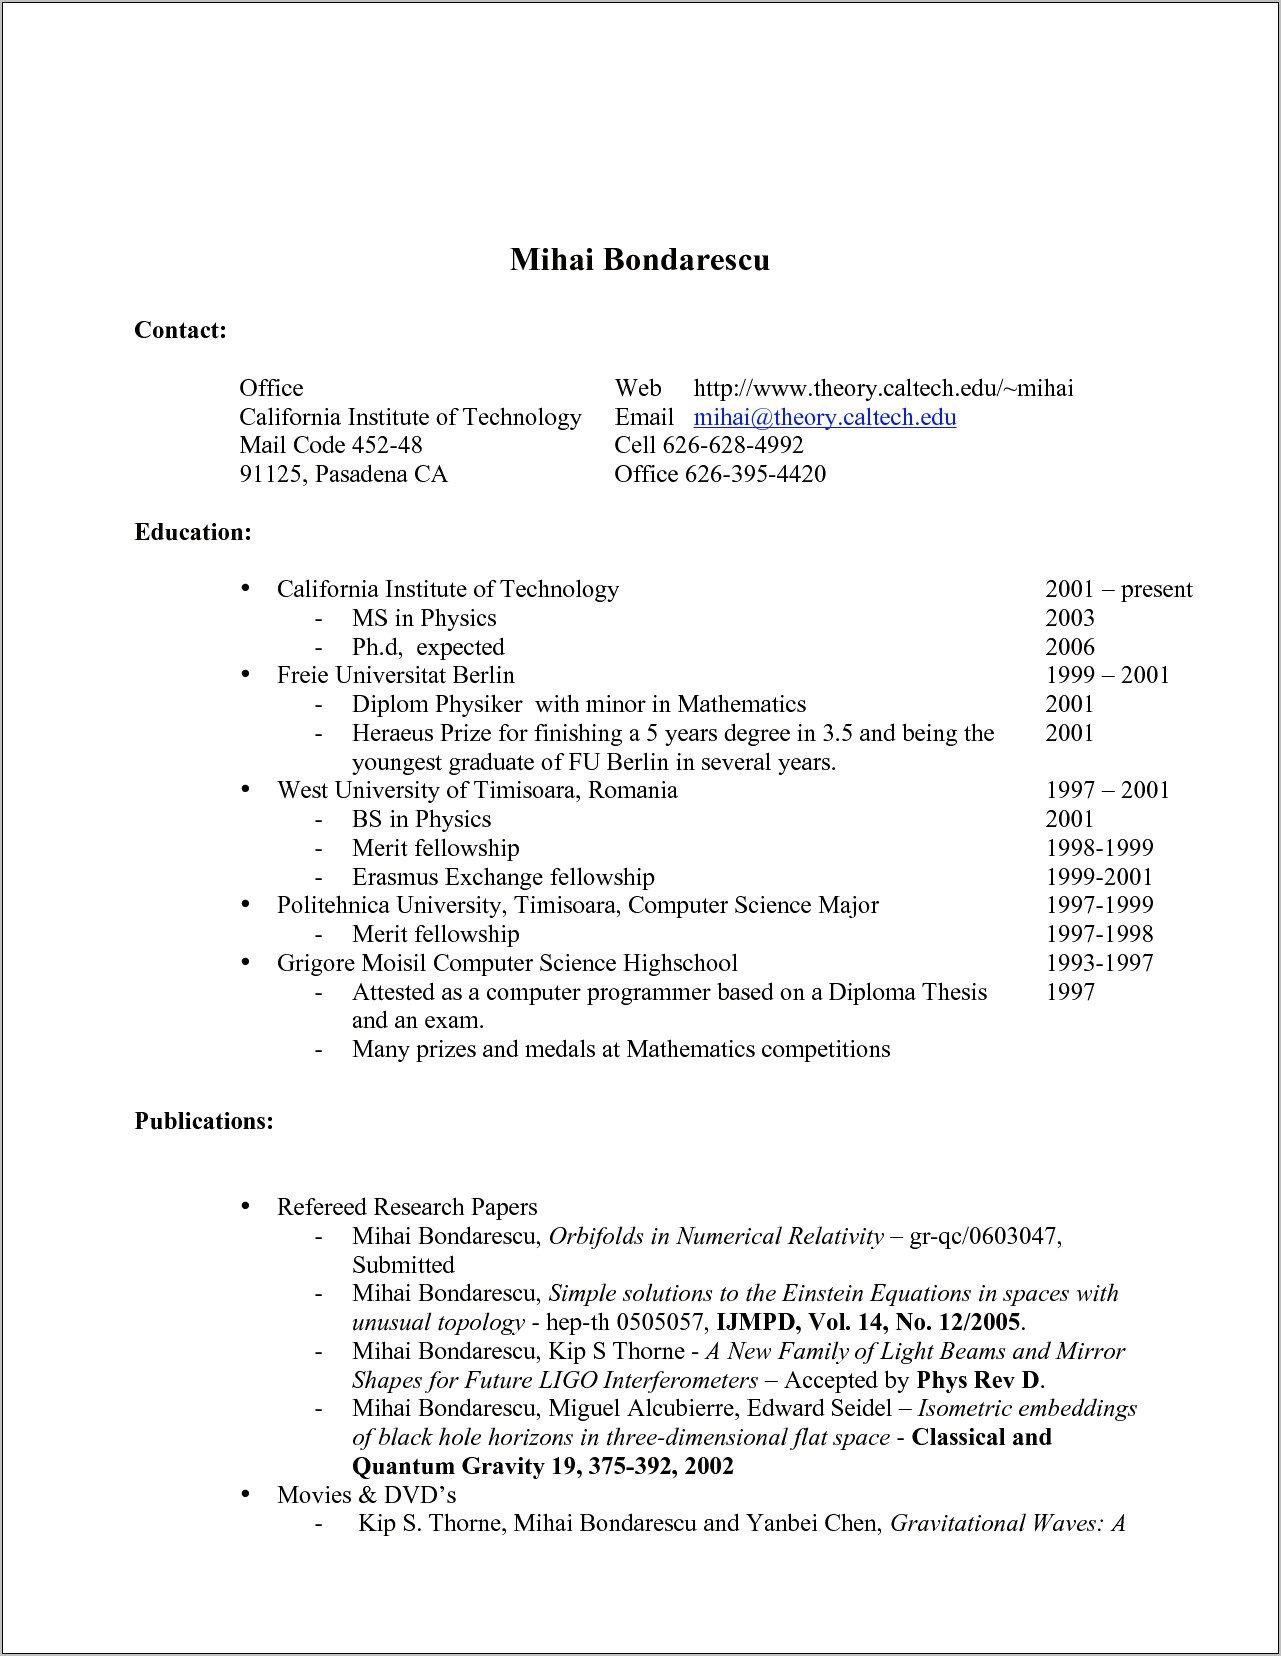 Resume For A Highschool Student Example